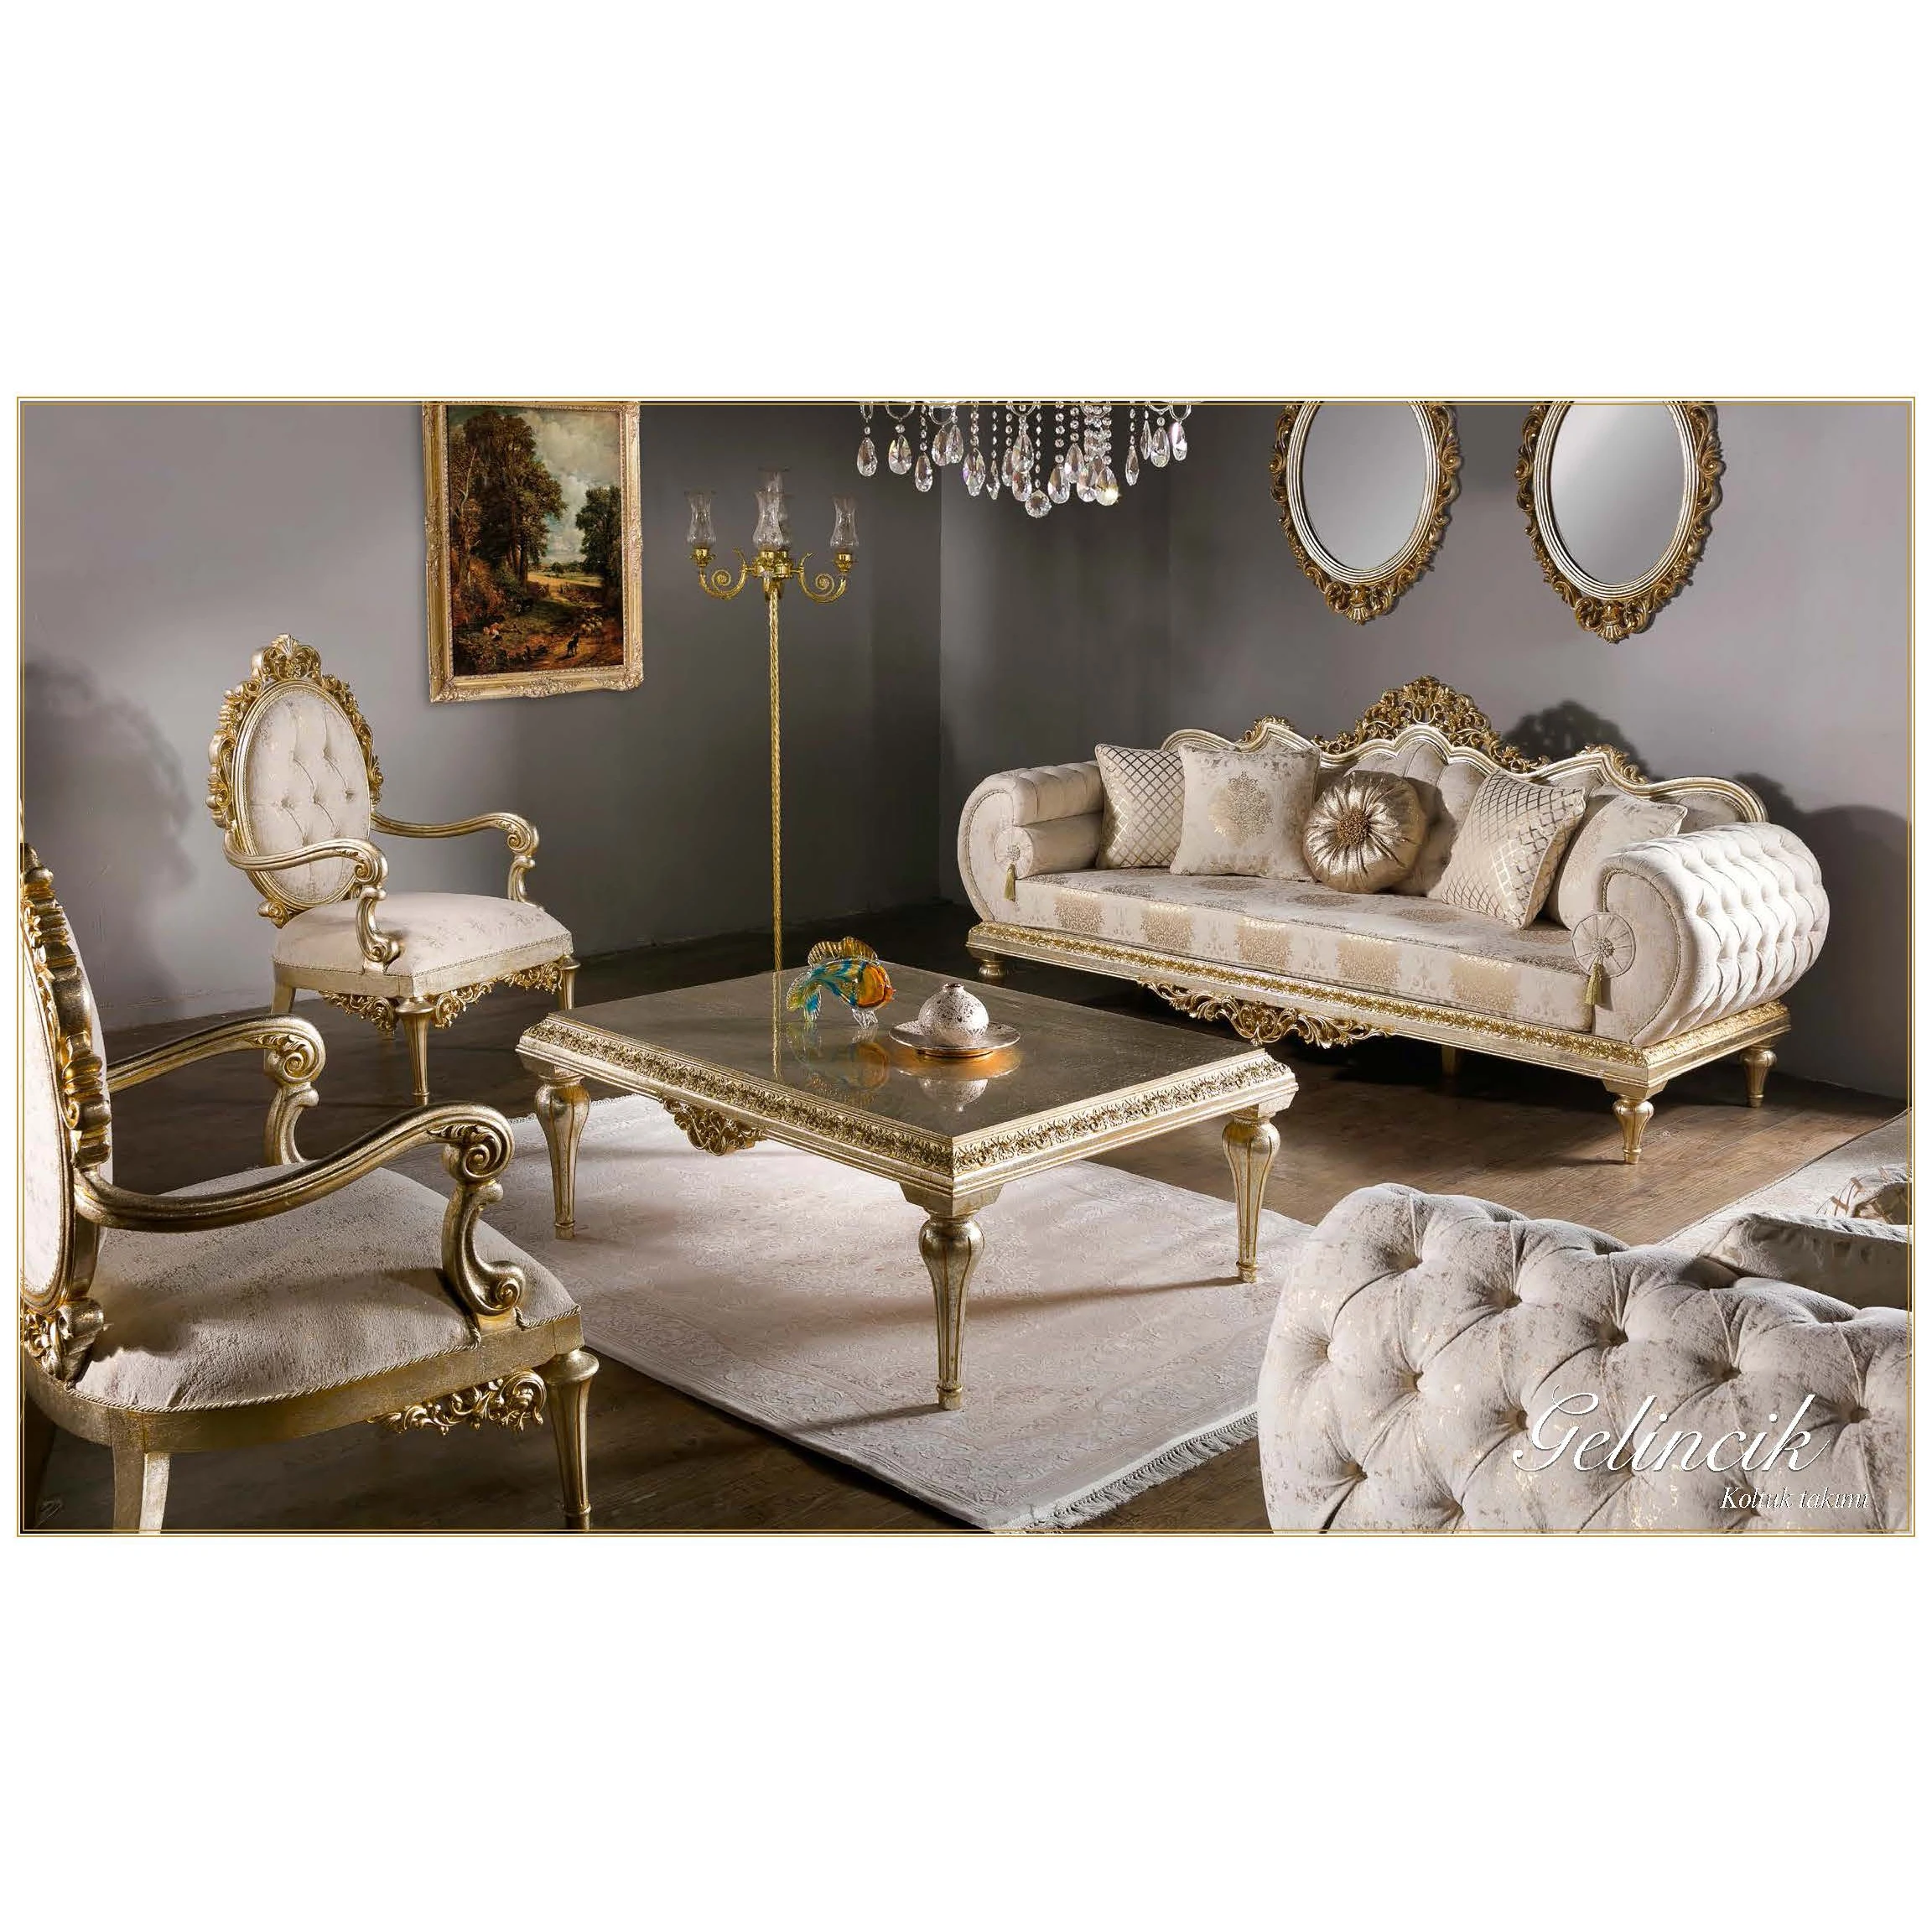 Turkish Middle East Eastern Luxury Classical Traditional Antique Royal Hand Carved Dining Sofa Set Living Room Furniture Set